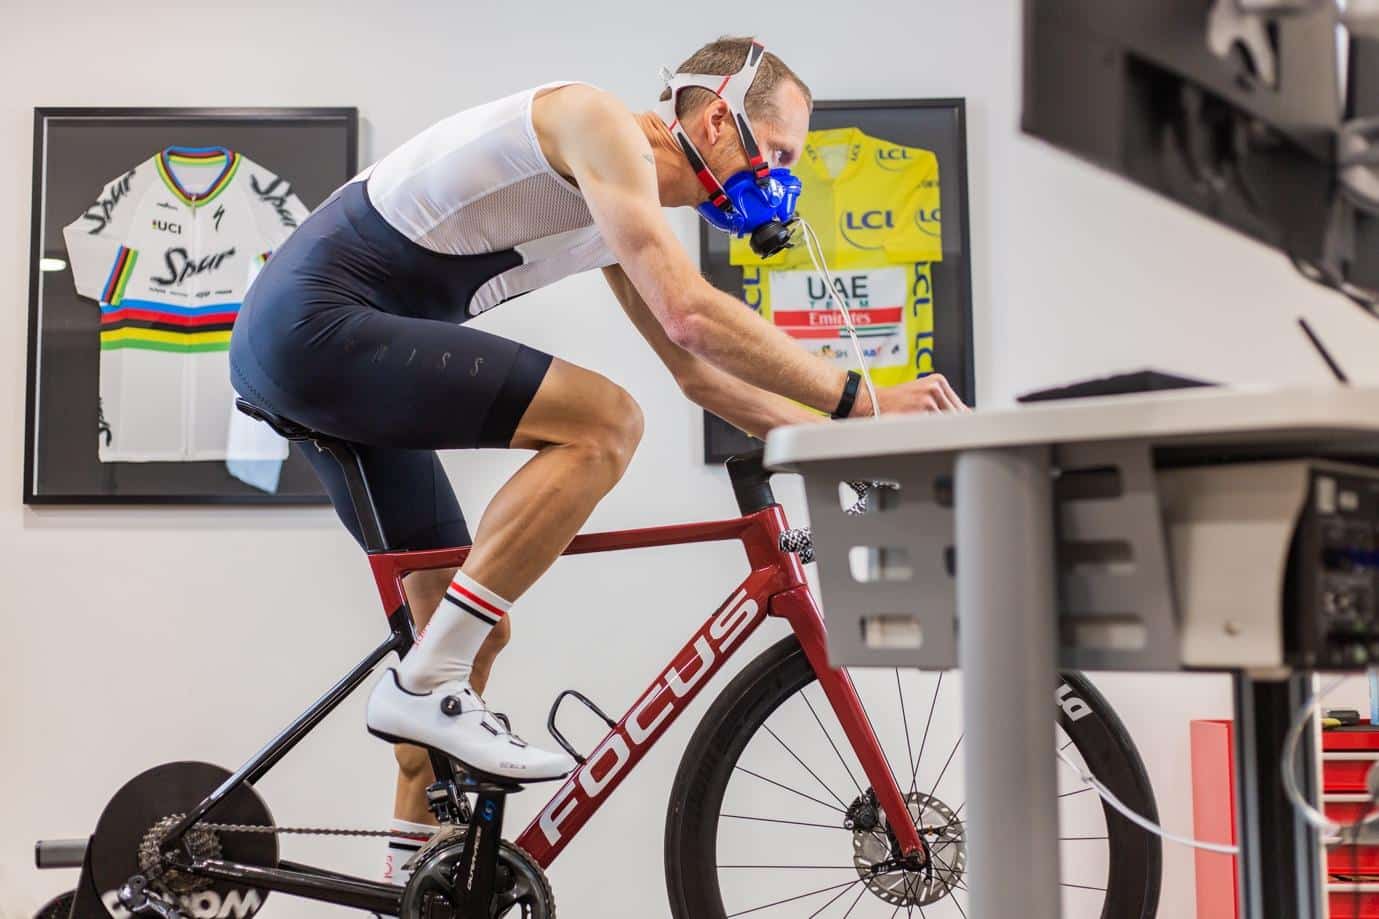 Cycling Performance testing can assist in achieving better training results